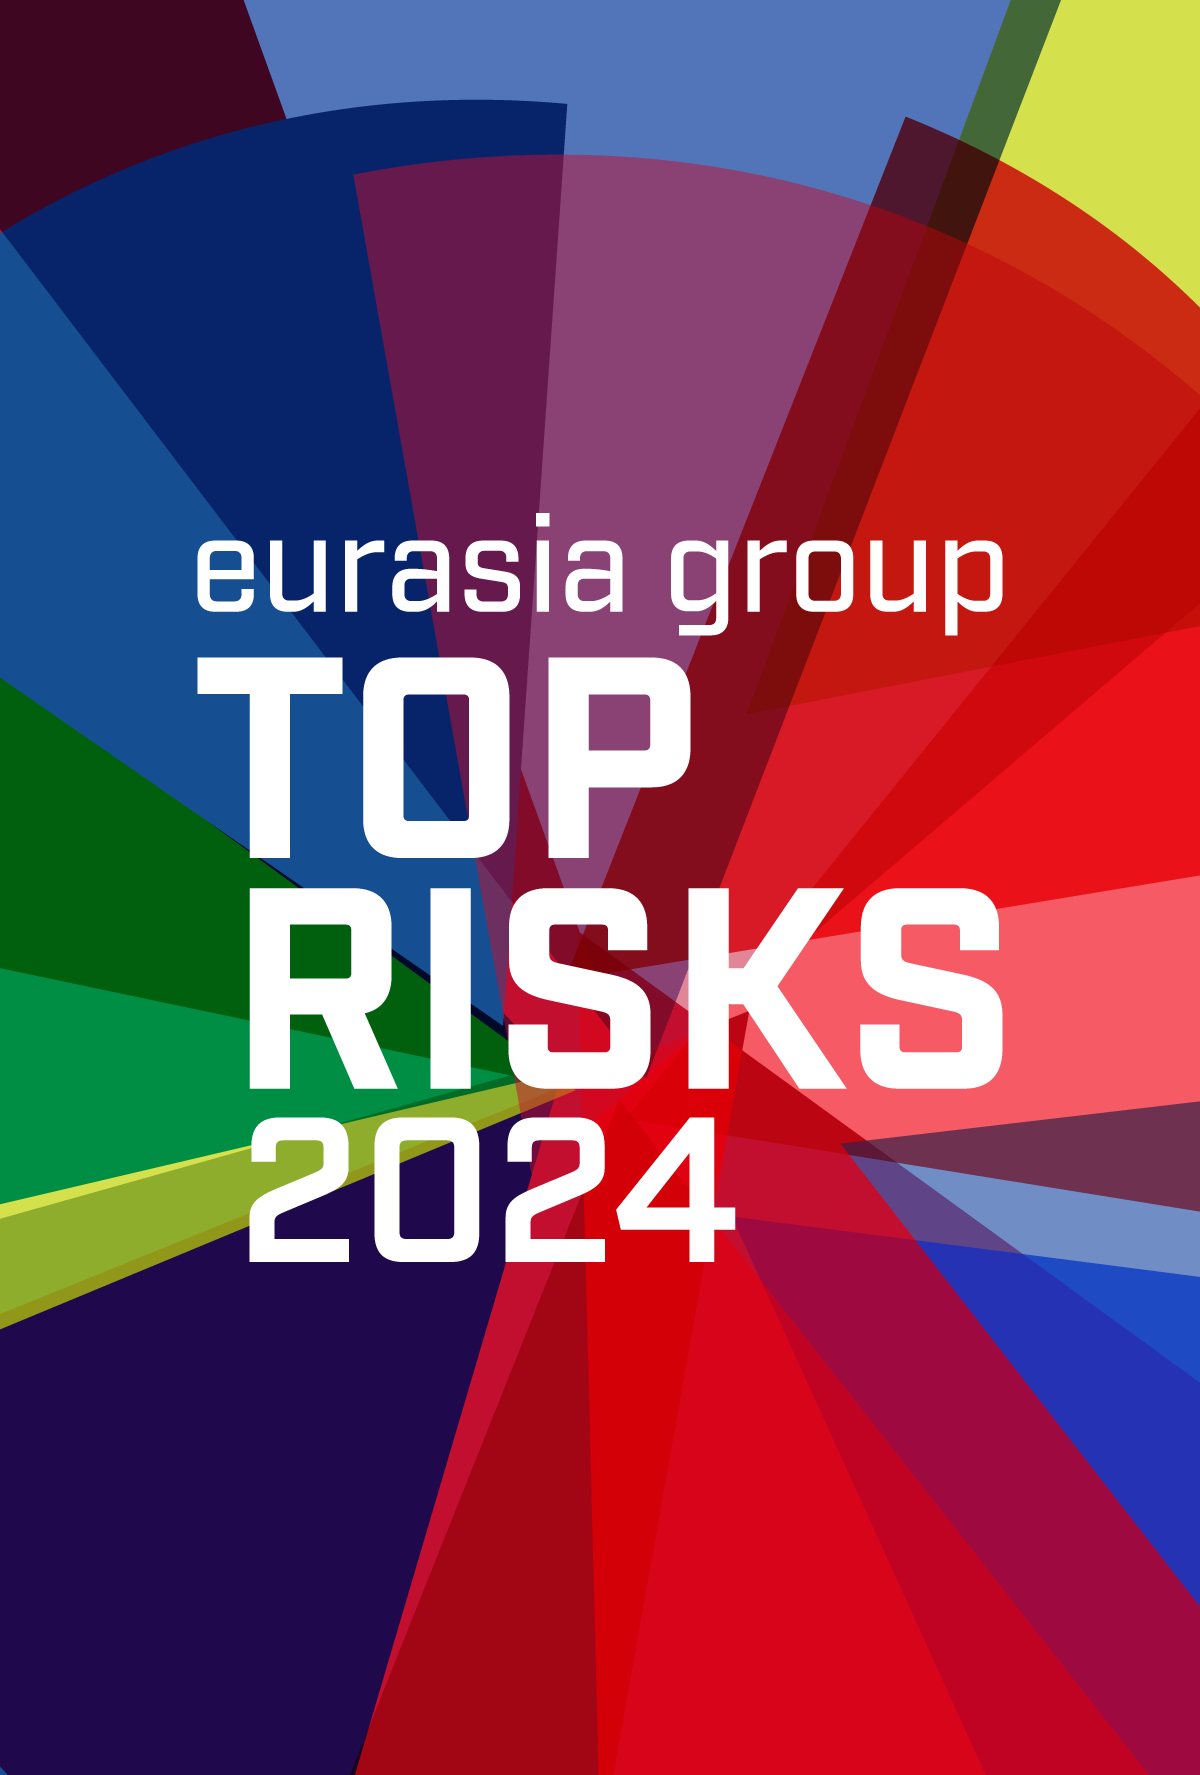 GZERO Media Be the first to know when the 2024 Top Risks reports is